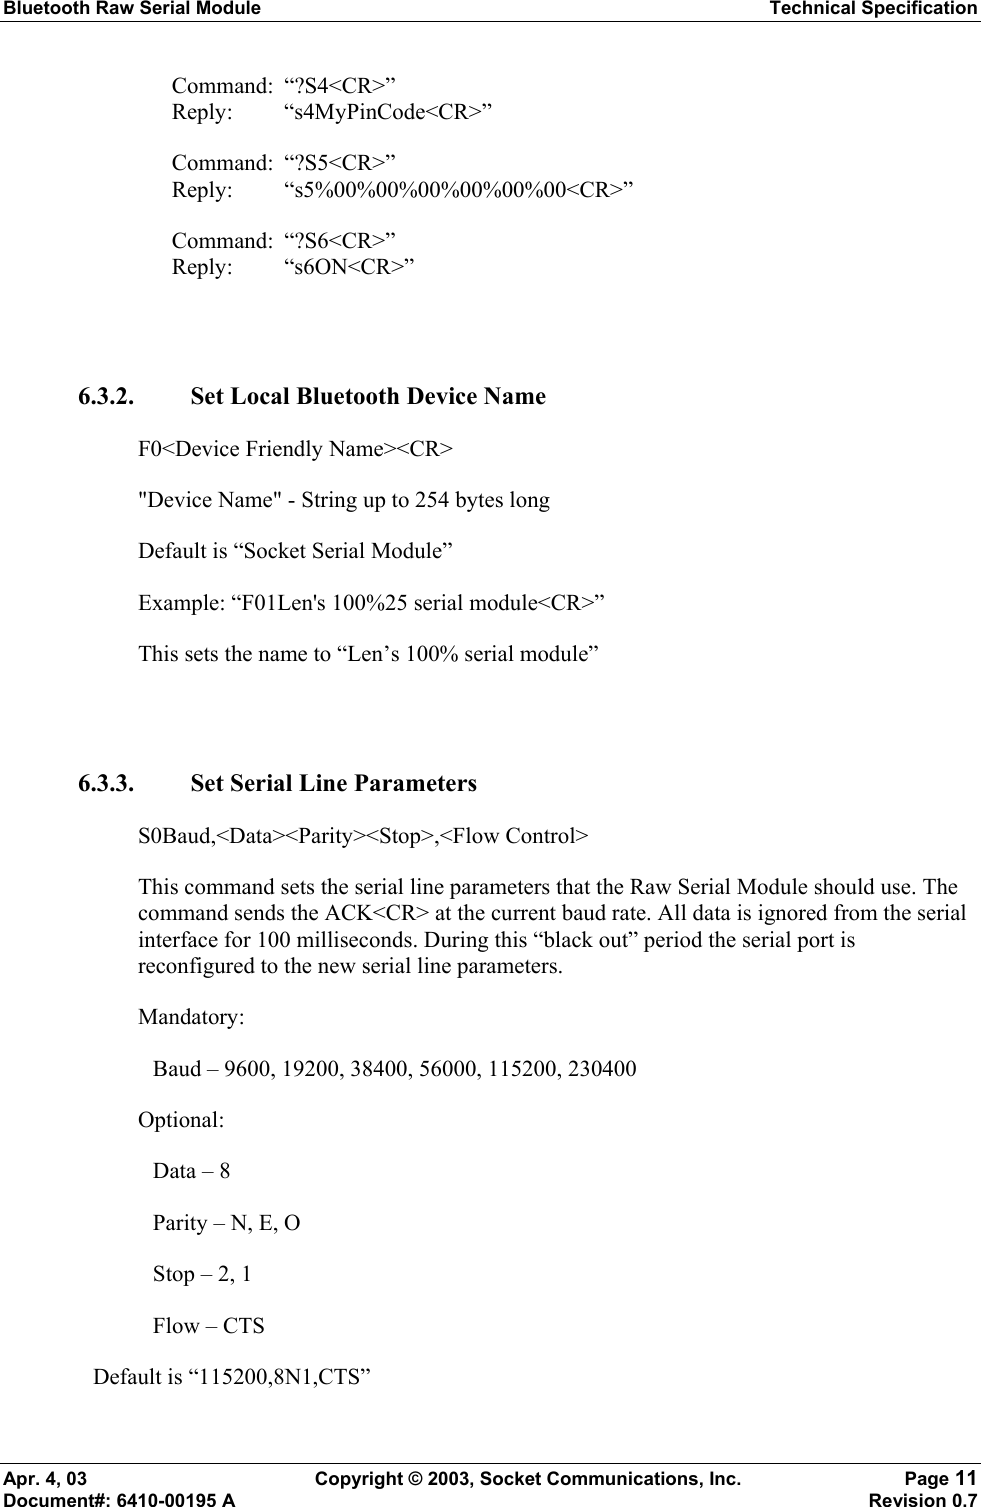 Bluetooth Raw Serial Module Technical Specification Apr. 4, 03  Copyright © 2003, Socket Communications, Inc.  Page 11 Document#: 6410-00195 A    Revision 0.7 Command: “?S4&lt;CR&gt;” Reply: “s4MyPinCode&lt;CR&gt;” Command: “?S5&lt;CR&gt;” Reply: “s5%00%00%00%00%00%00&lt;CR&gt;”  Command: “?S6&lt;CR&gt;” Reply: “s6ON&lt;CR&gt;”  6.3.2. Set Local Bluetooth Device Name F0&lt;Device Friendly Name&gt;&lt;CR&gt; &quot;Device Name&quot; - String up to 254 bytes long  Default is “Socket Serial Module”  Example: “F01Len&apos;s 100%25 serial module&lt;CR&gt;” This sets the name to “Len’s 100% serial module”   6.3.3. Set Serial Line Parameters S0Baud,&lt;Data&gt;&lt;Parity&gt;&lt;Stop&gt;,&lt;Flow Control&gt; This command sets the serial line parameters that the Raw Serial Module should use. The command sends the ACK&lt;CR&gt; at the current baud rate. All data is ignored from the serial interface for 100 milliseconds. During this “black out” period the serial port is reconfigured to the new serial line parameters. Mandatory:  Baud – 9600, 19200, 38400, 56000, 115200, 230400 Optional: Data – 8 Parity – N, E, O Stop – 2, 1 Flow – CTS Default is “115200,8N1,CTS” 